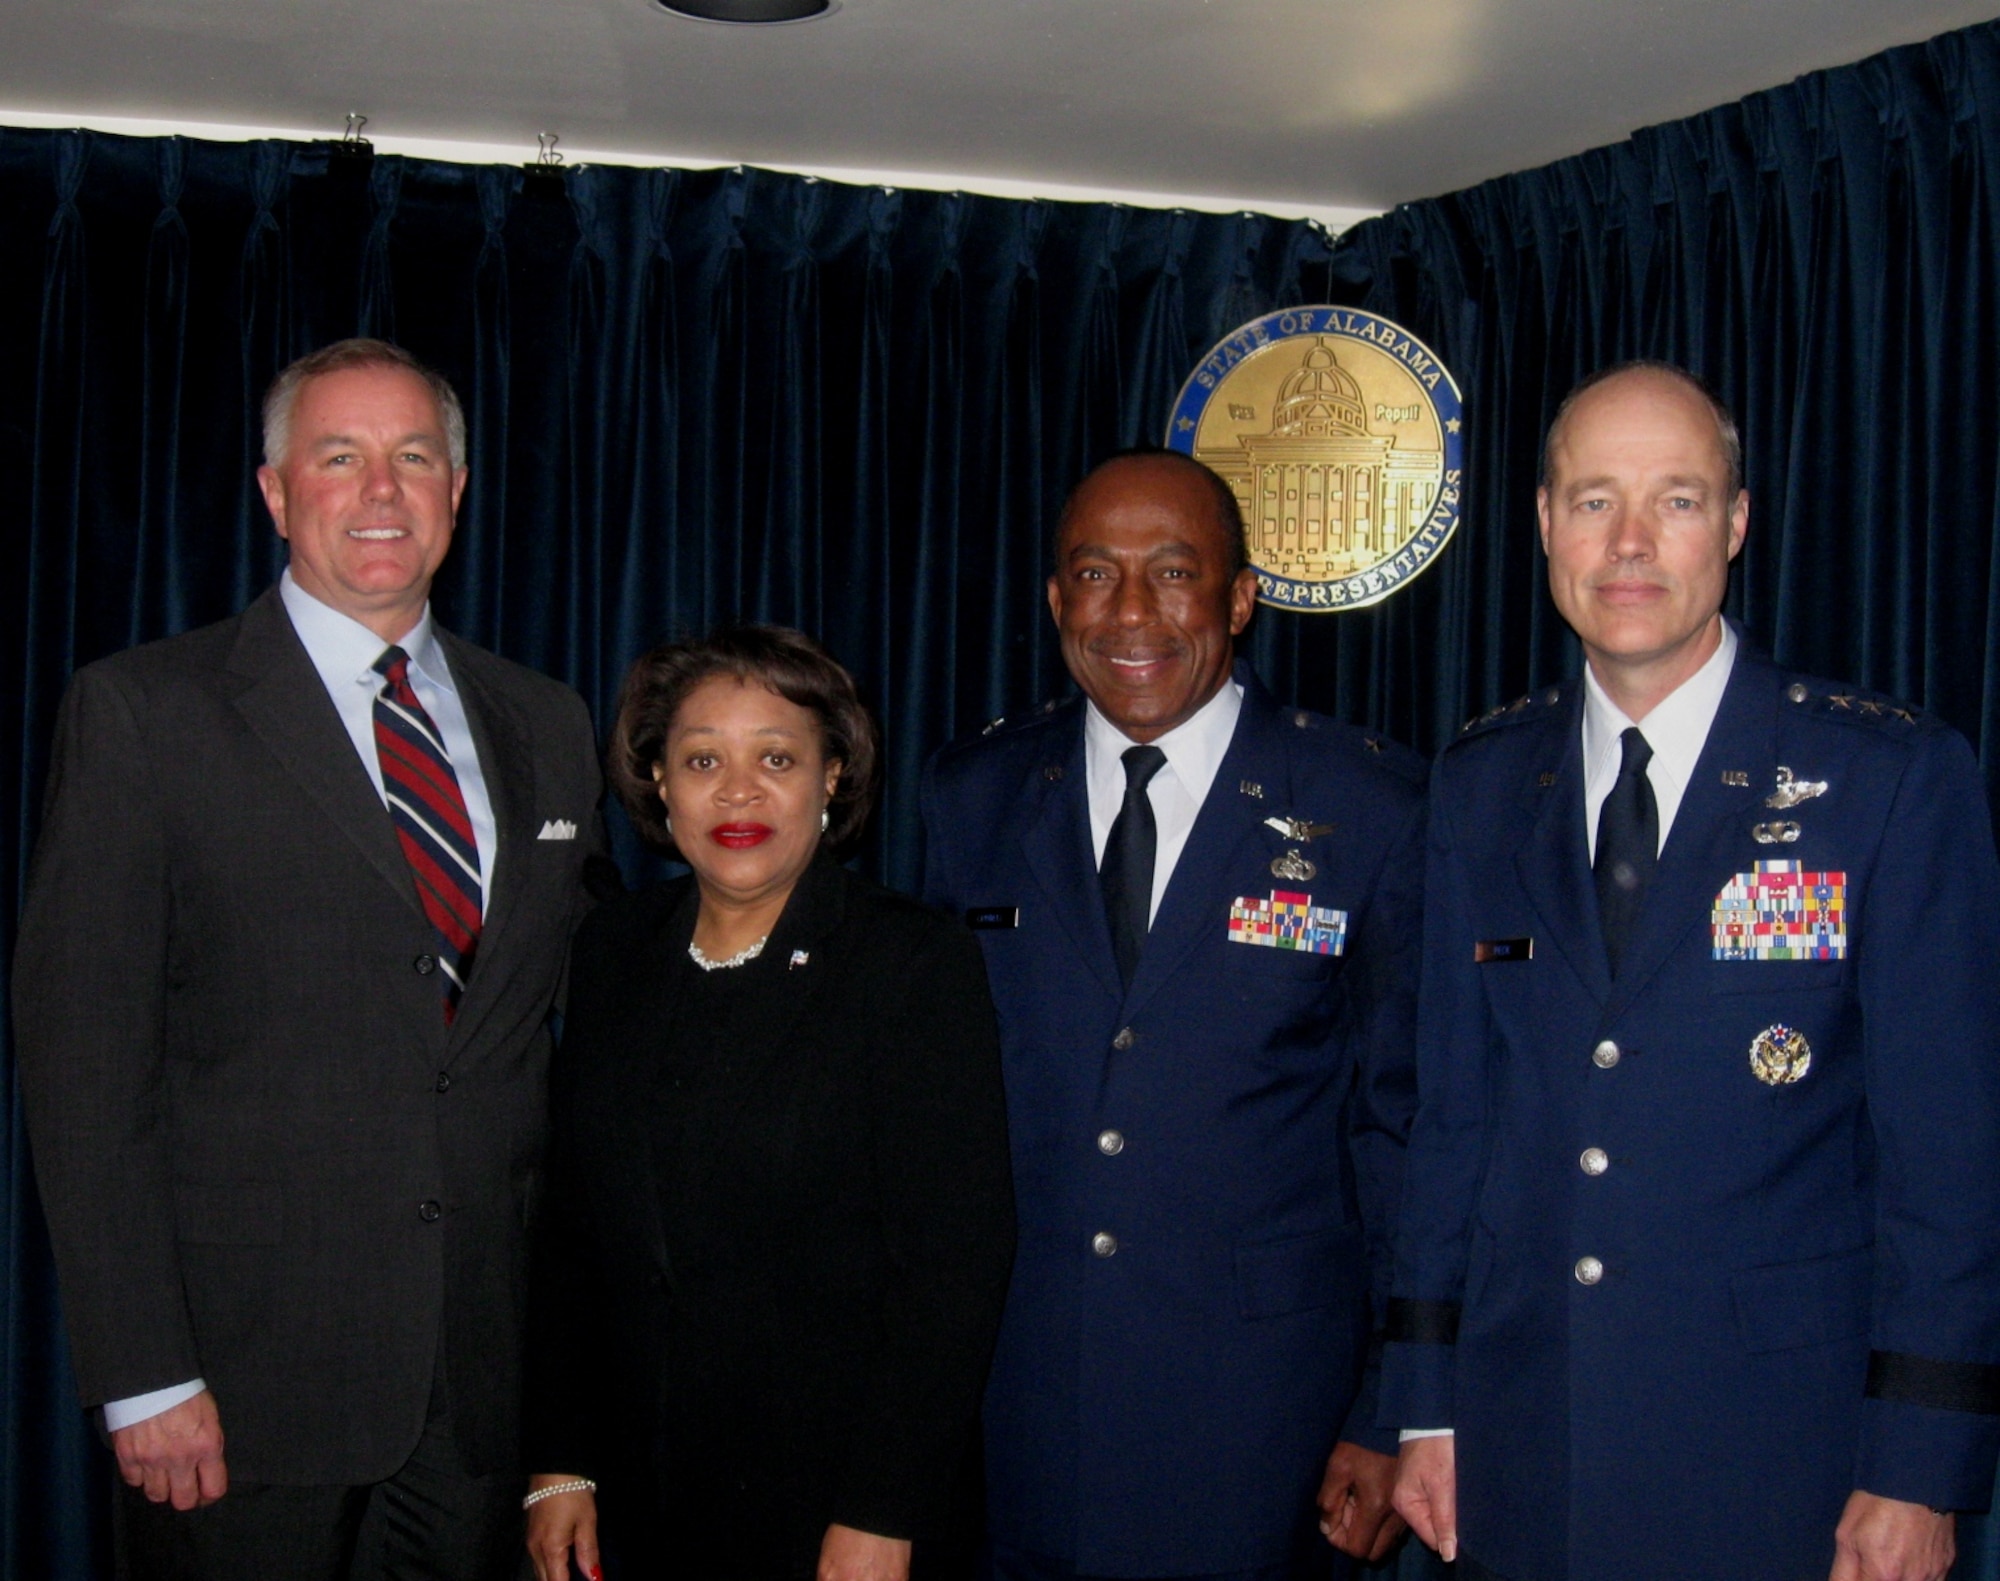 Brig. Gen. Edward F. Crowell (second from right) was honored March 12 by a joint resolution from both houses of the Alabama Legislature. The resolution honored General Crowell for his Reserve military service career that began as an Airman Basic in the 908th Airlift Wing located at Maxwell. Leaving the 908th as a colonel after 23 years, General Crowell served at two numbered Air Forces before returning to Maxwell as the mobilization assistant to the Air University commander. General Crowell completed his 35-year career retiring at Maxwell Feb. 4. Shown from left are Rep. Greg Wren , Mrs. Ernestine Crowell, General Crowell, and Air University Commander Lt. Gen. Allen G. Peck. (Courtesy photo)